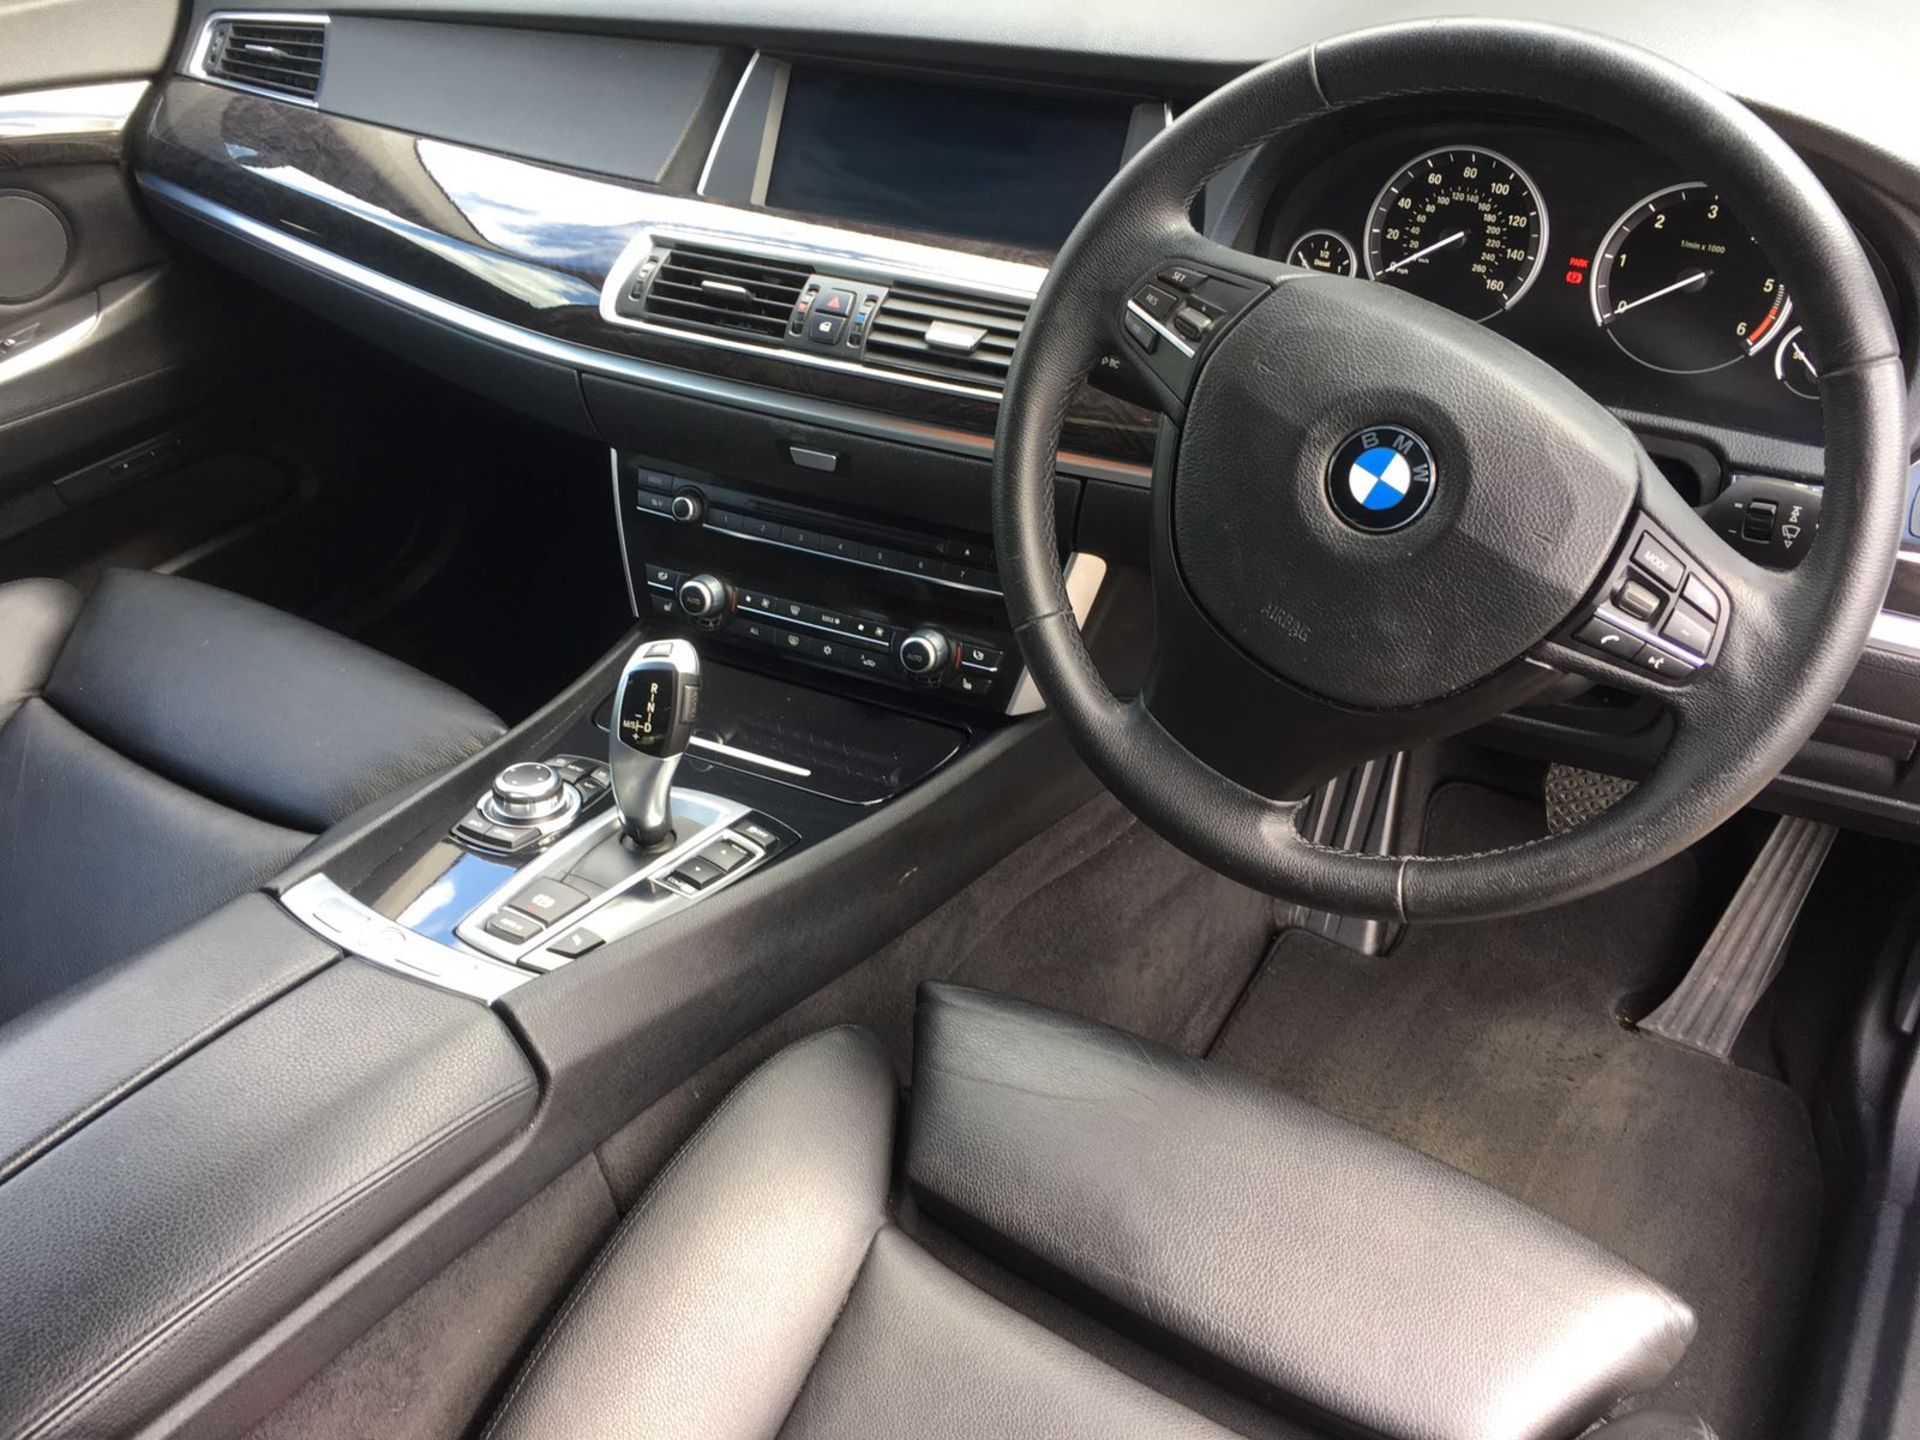 BMW 535D GT Gran Turismo 2012/12. 57,000 Miles. Automatic Gearbox - Image 13 of 19